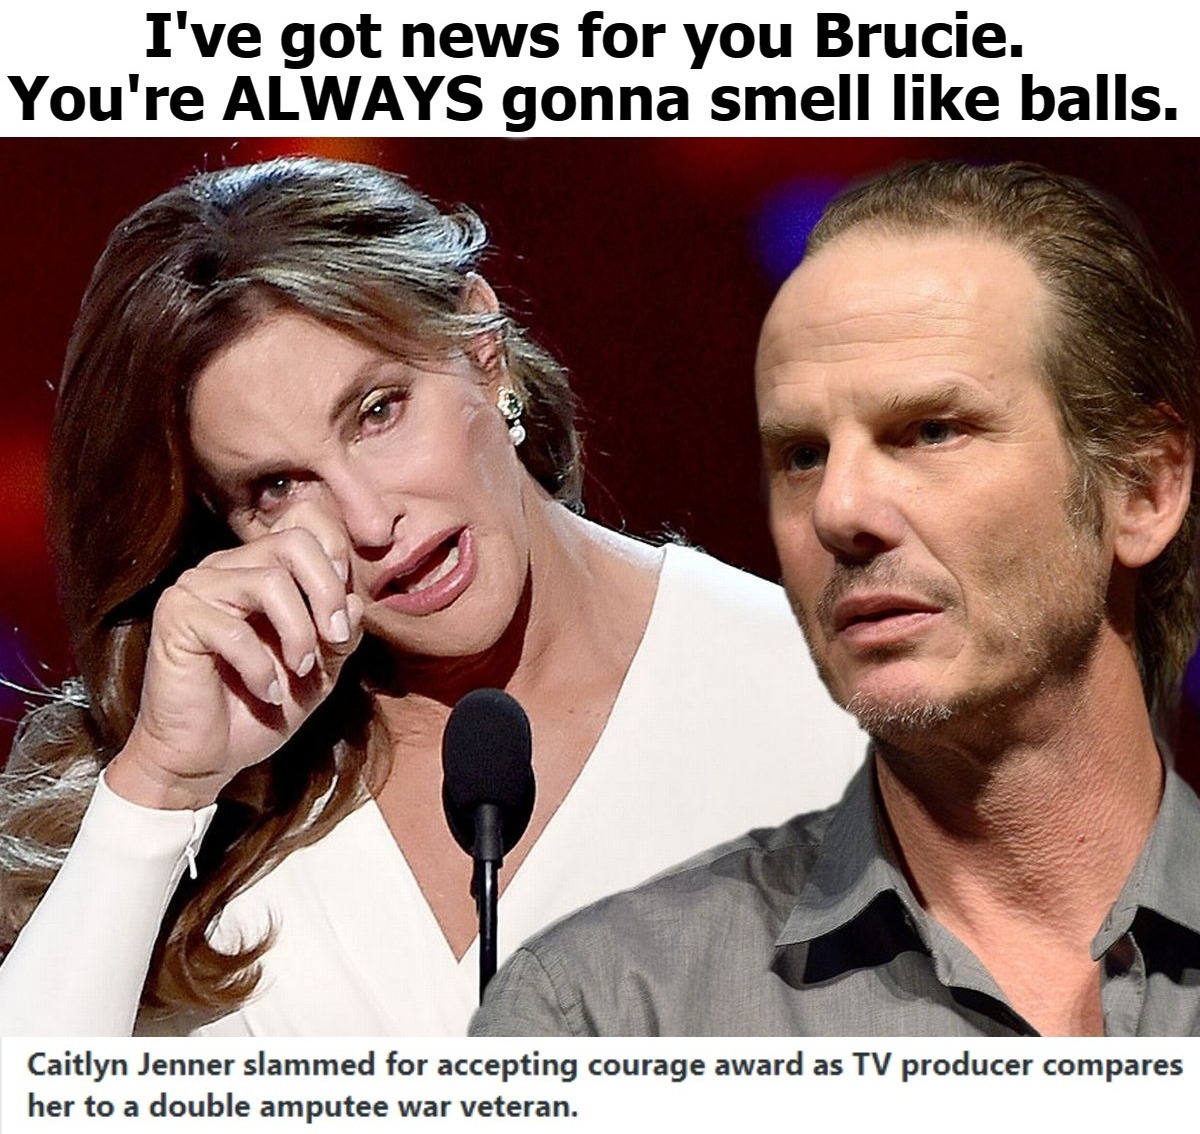 I've got news for you Brucie. | image tagged in breaking news,brucaitlyn jenner,brucie,bruce jenner,cloudy with a chance of meatballs,veteran my ass | made w/ Imgflip meme maker